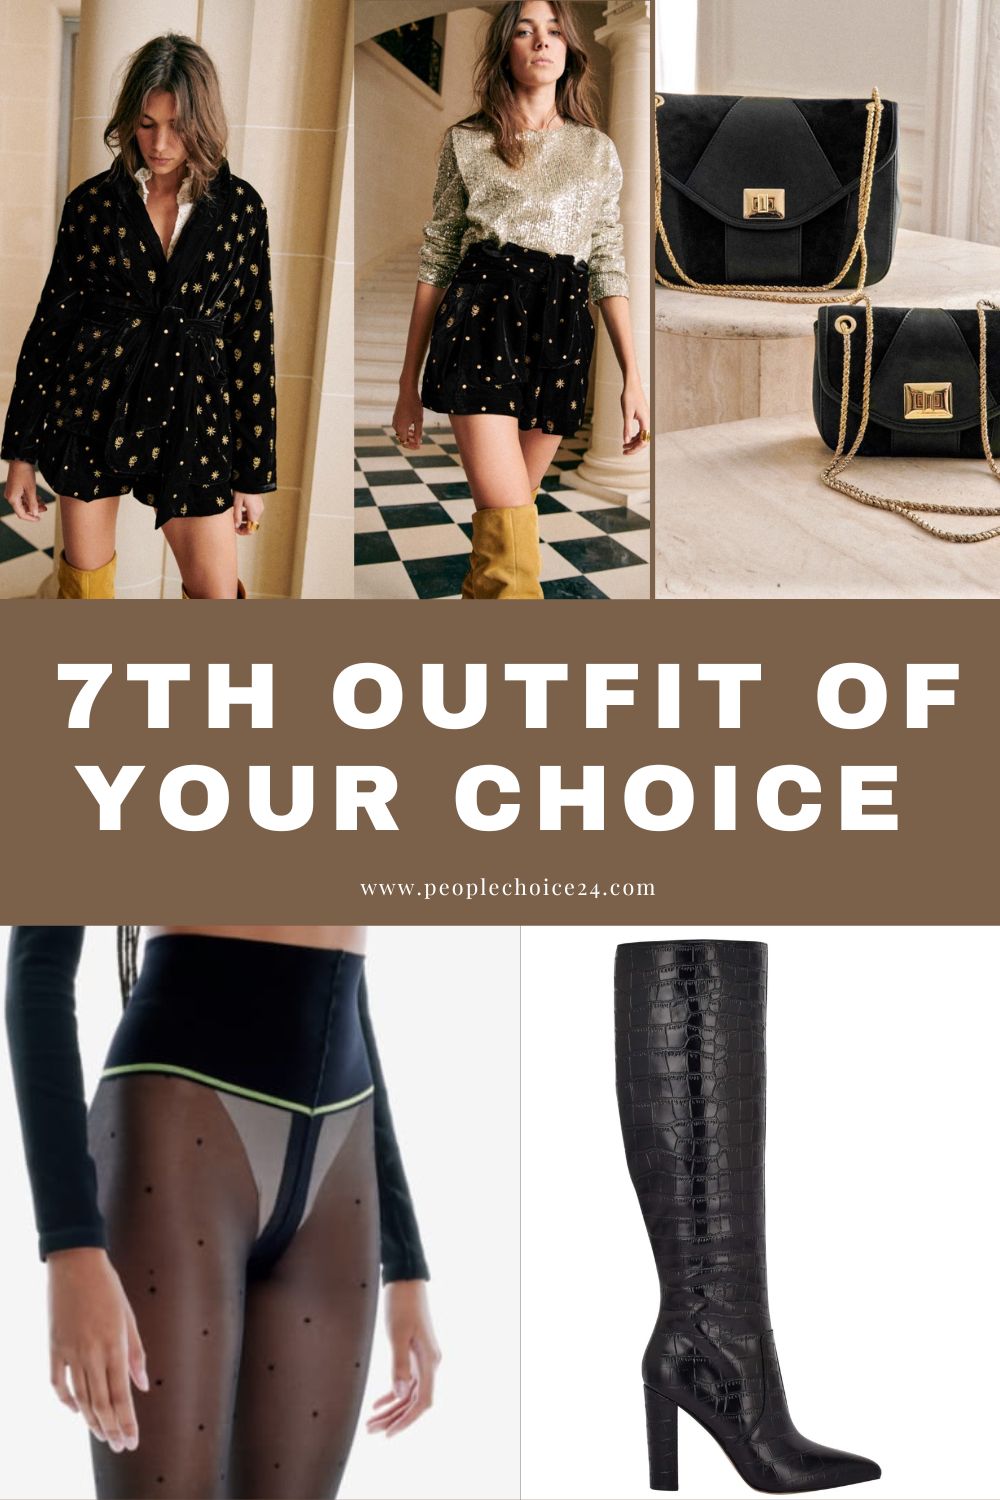 7th Outfit Of Your Choice